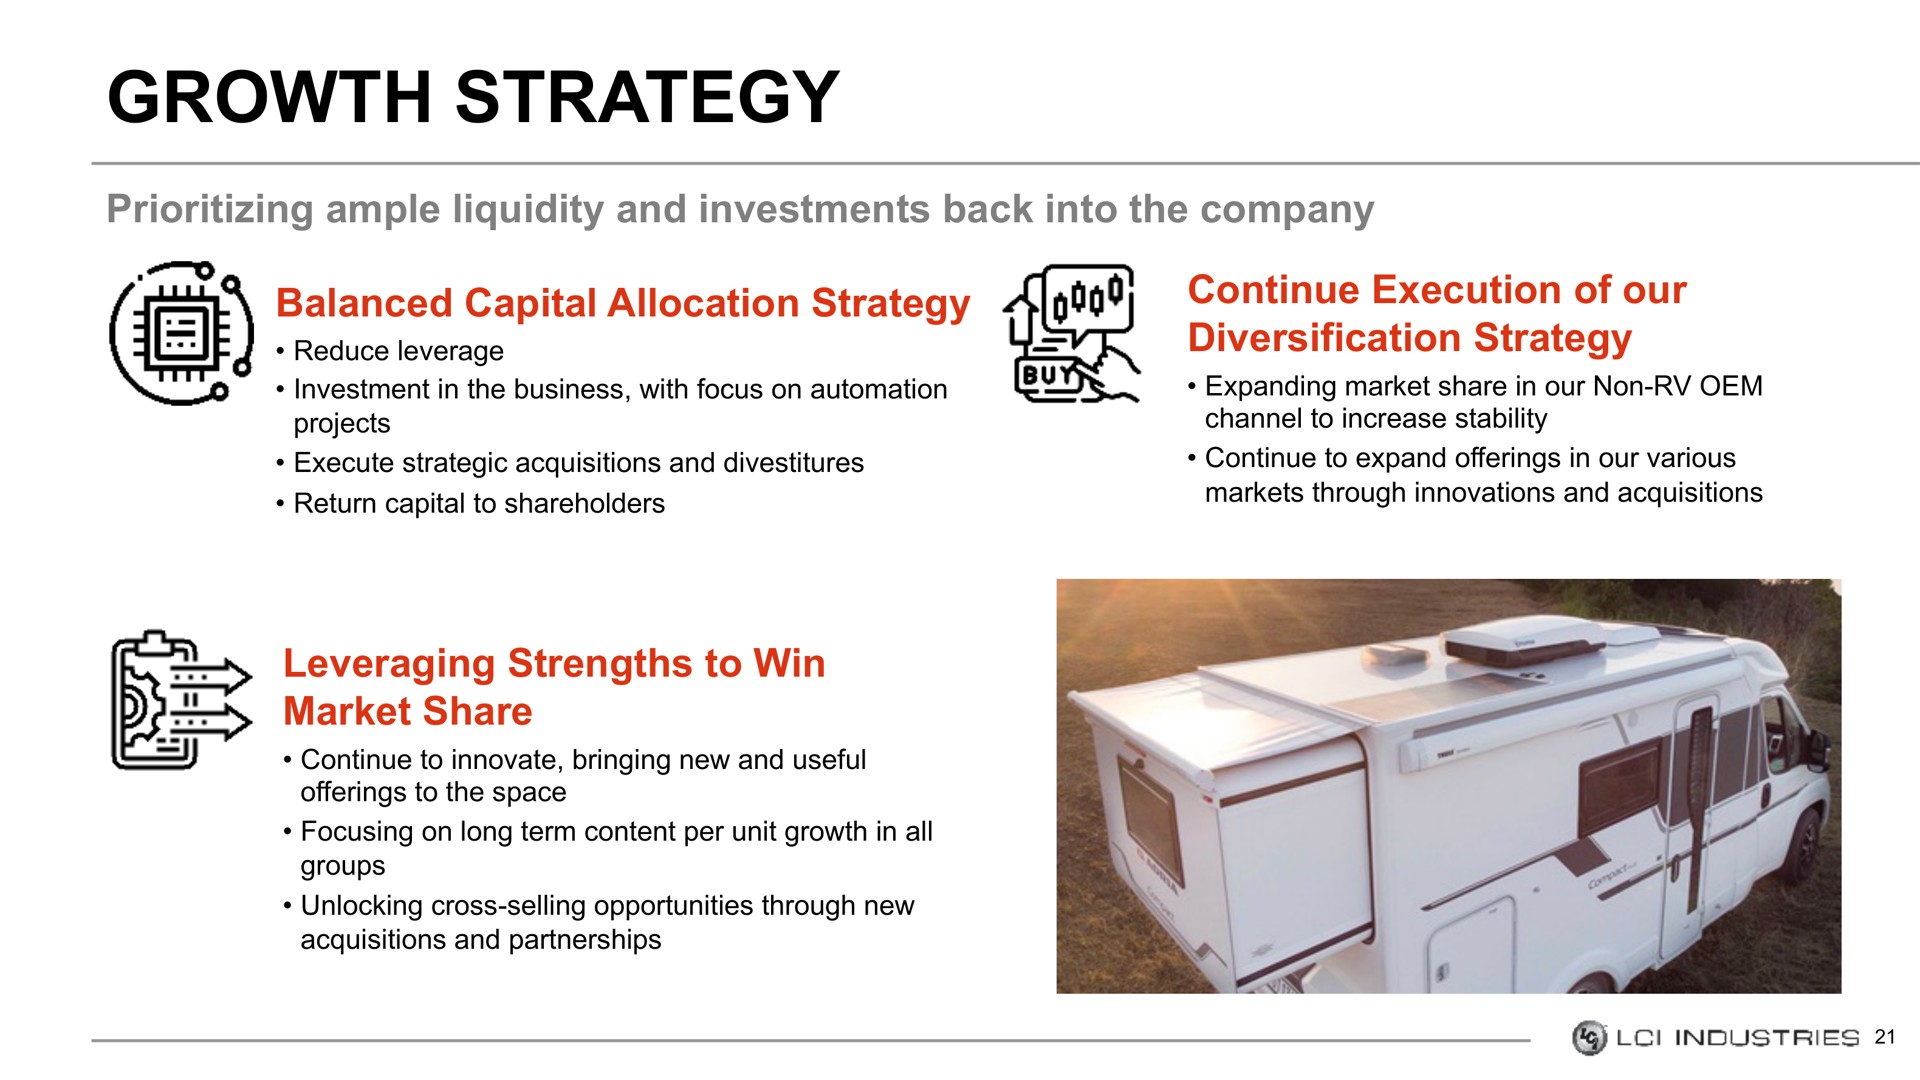 growth strategy execution of continue | LCI Industries